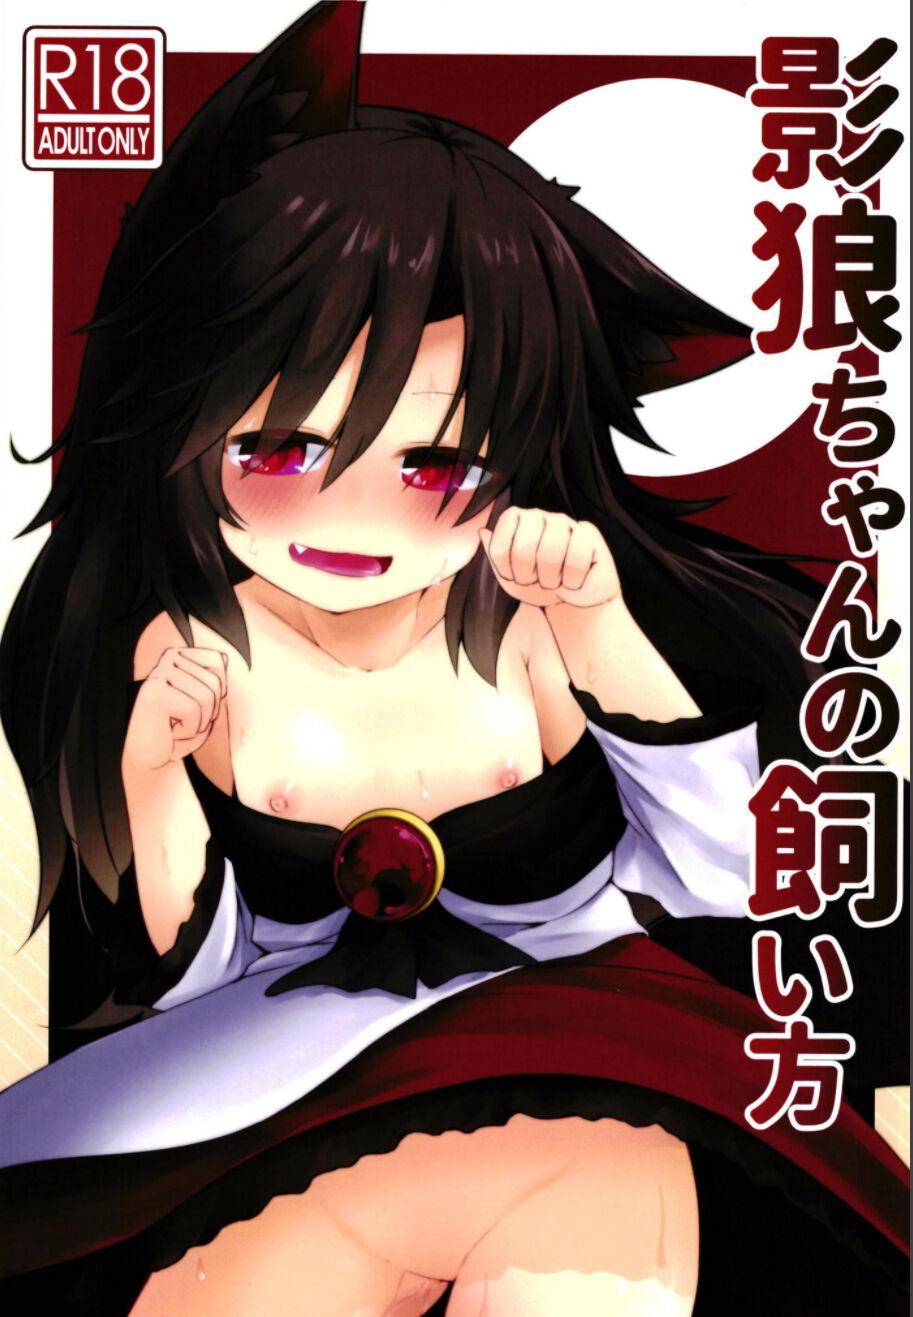 Best Blowjobs Ever Kagerou-chan no Kaikata - Touhou project Staxxx - Page 2